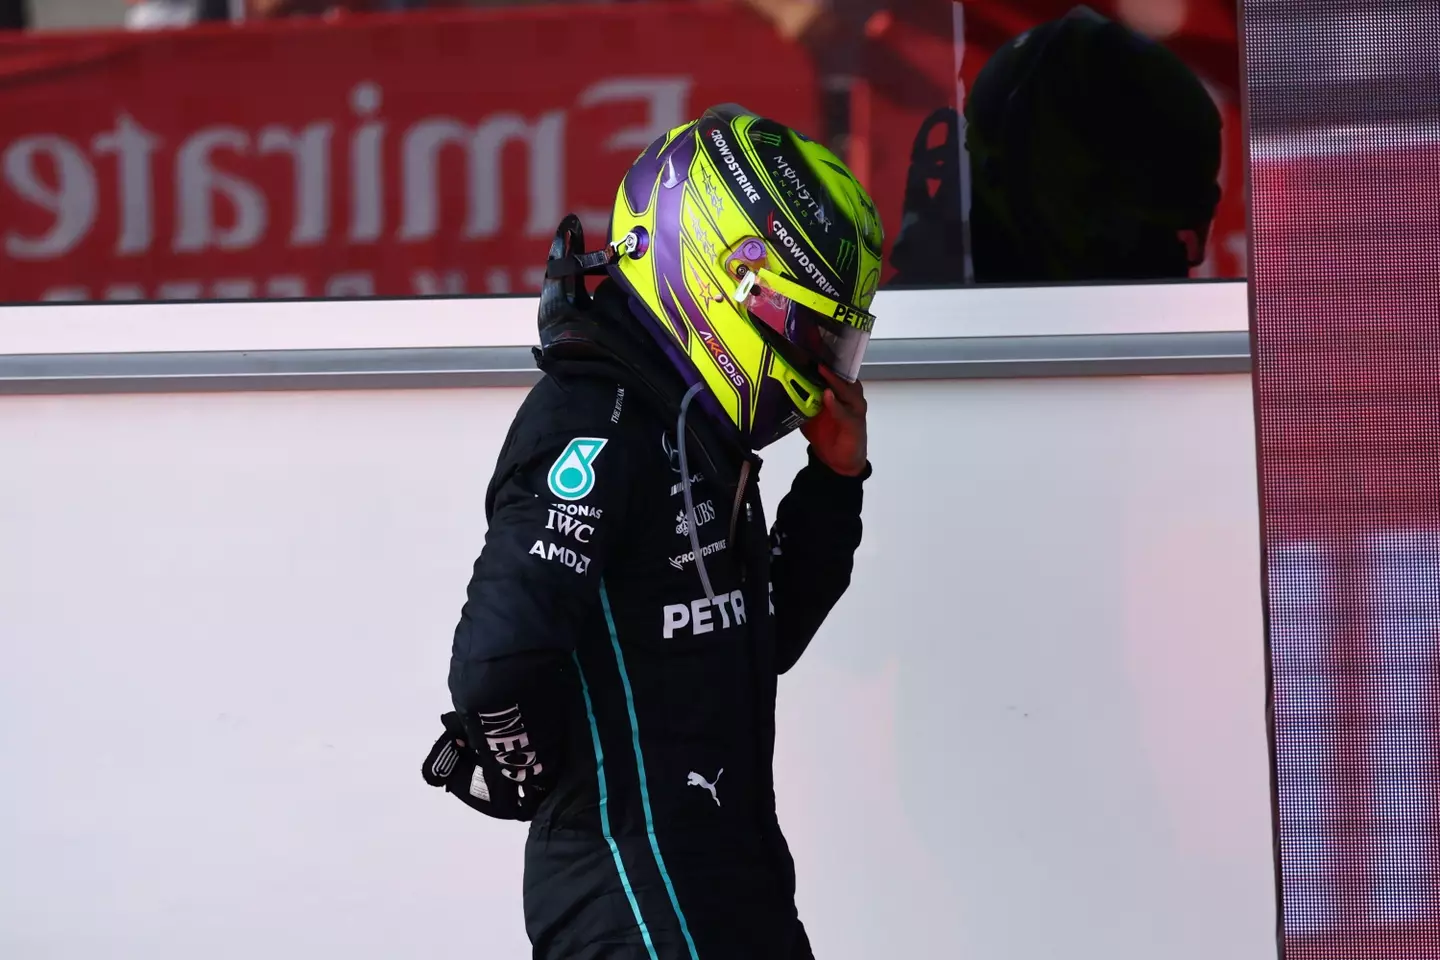 Hamilton holding his back after getting out of the car. Image: Alamy